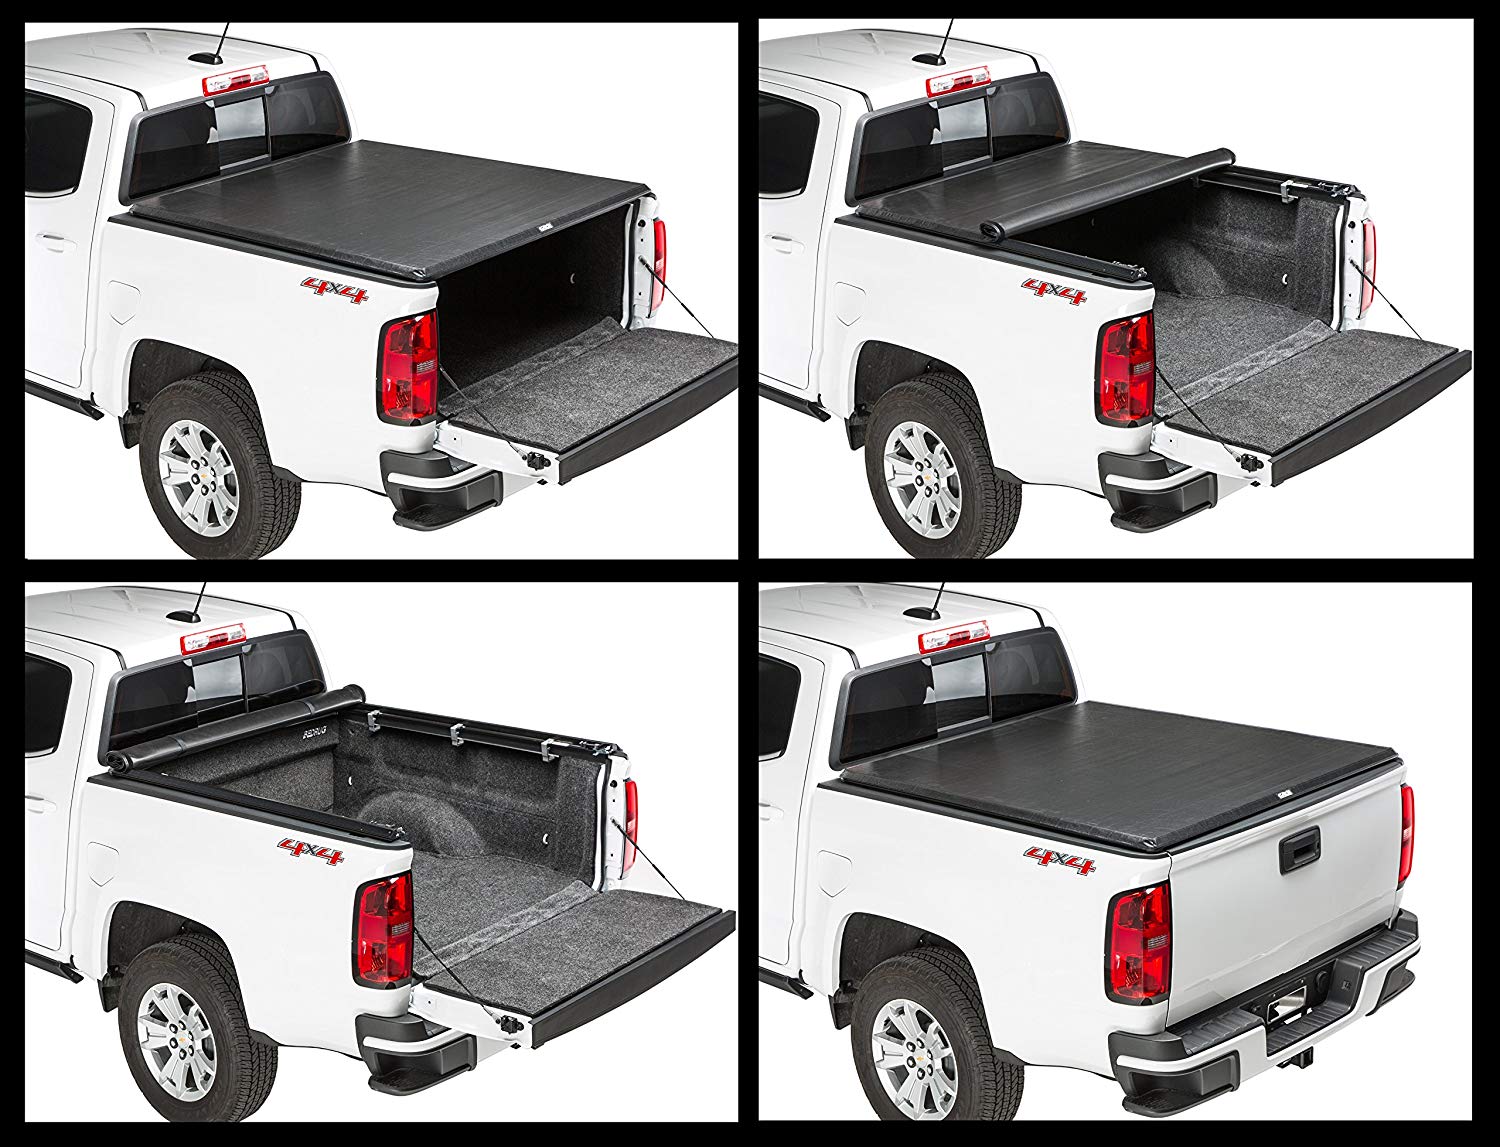 Gator by RealTruck SR1 Roll-Up (Compatible with) 2007-2013 Chevy Silverado GMC Sierra 6.5 FT Bed Only Soft Roll Up Tonneau Truck Bed Cover (55106) Made in The USA - image 3 of 7